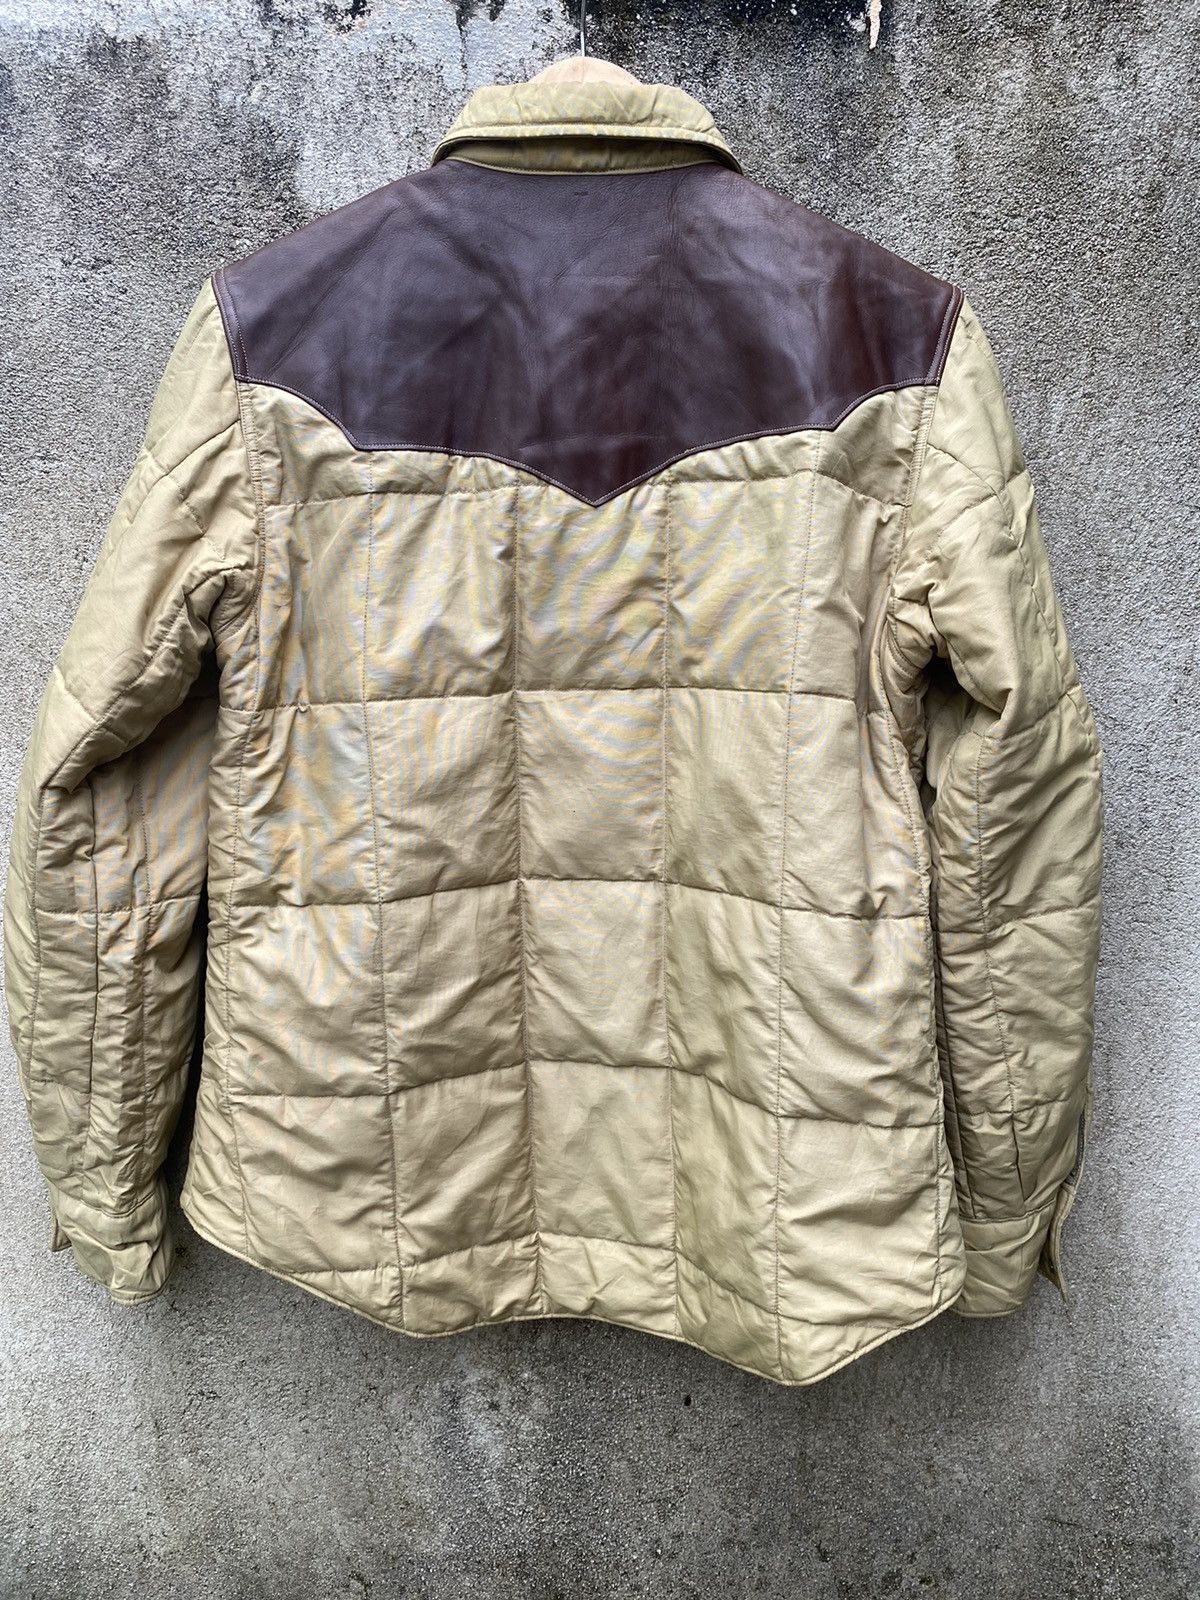 Japanese Brand - Sugar Cane & Co Leather Diamond Quilted Western Jacket - 2